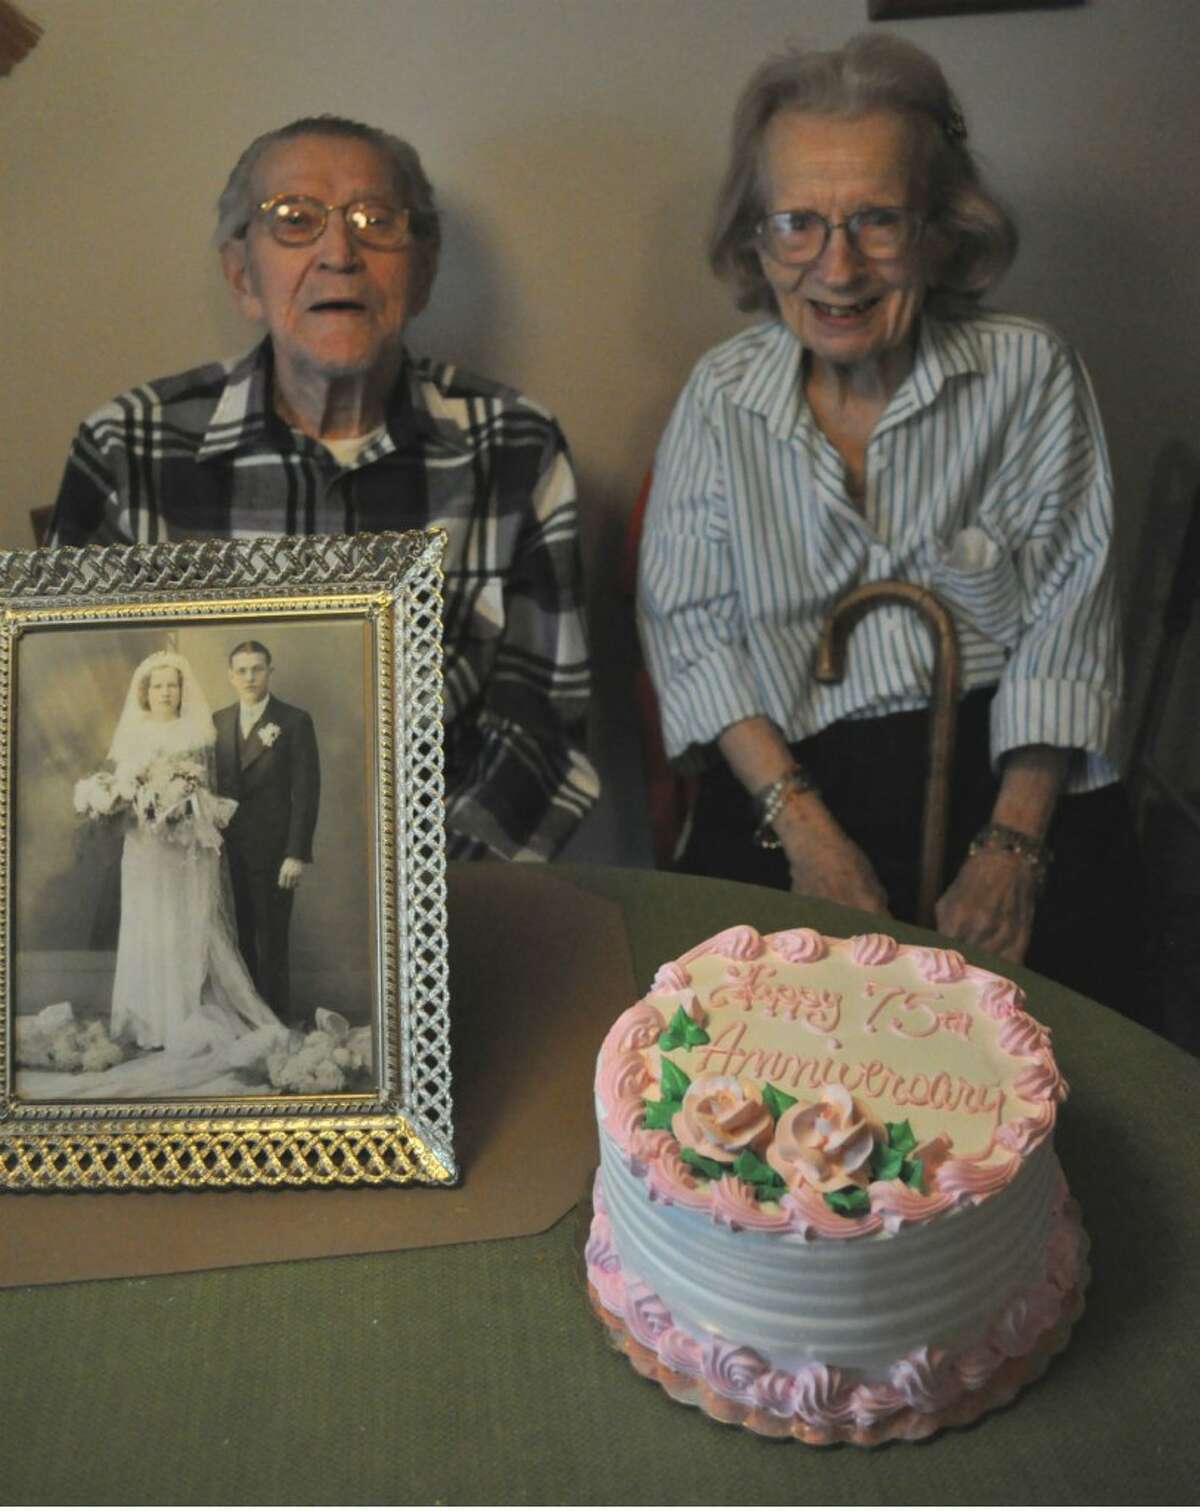 Joseph and Virginia Oleniczak celebrate their 75th wedding anniversary on Tuesday with a cake and their original wedding photo from 1937. Joe was 25 and Virginia was 23 when they married. They are now 100 and 98 respectively.